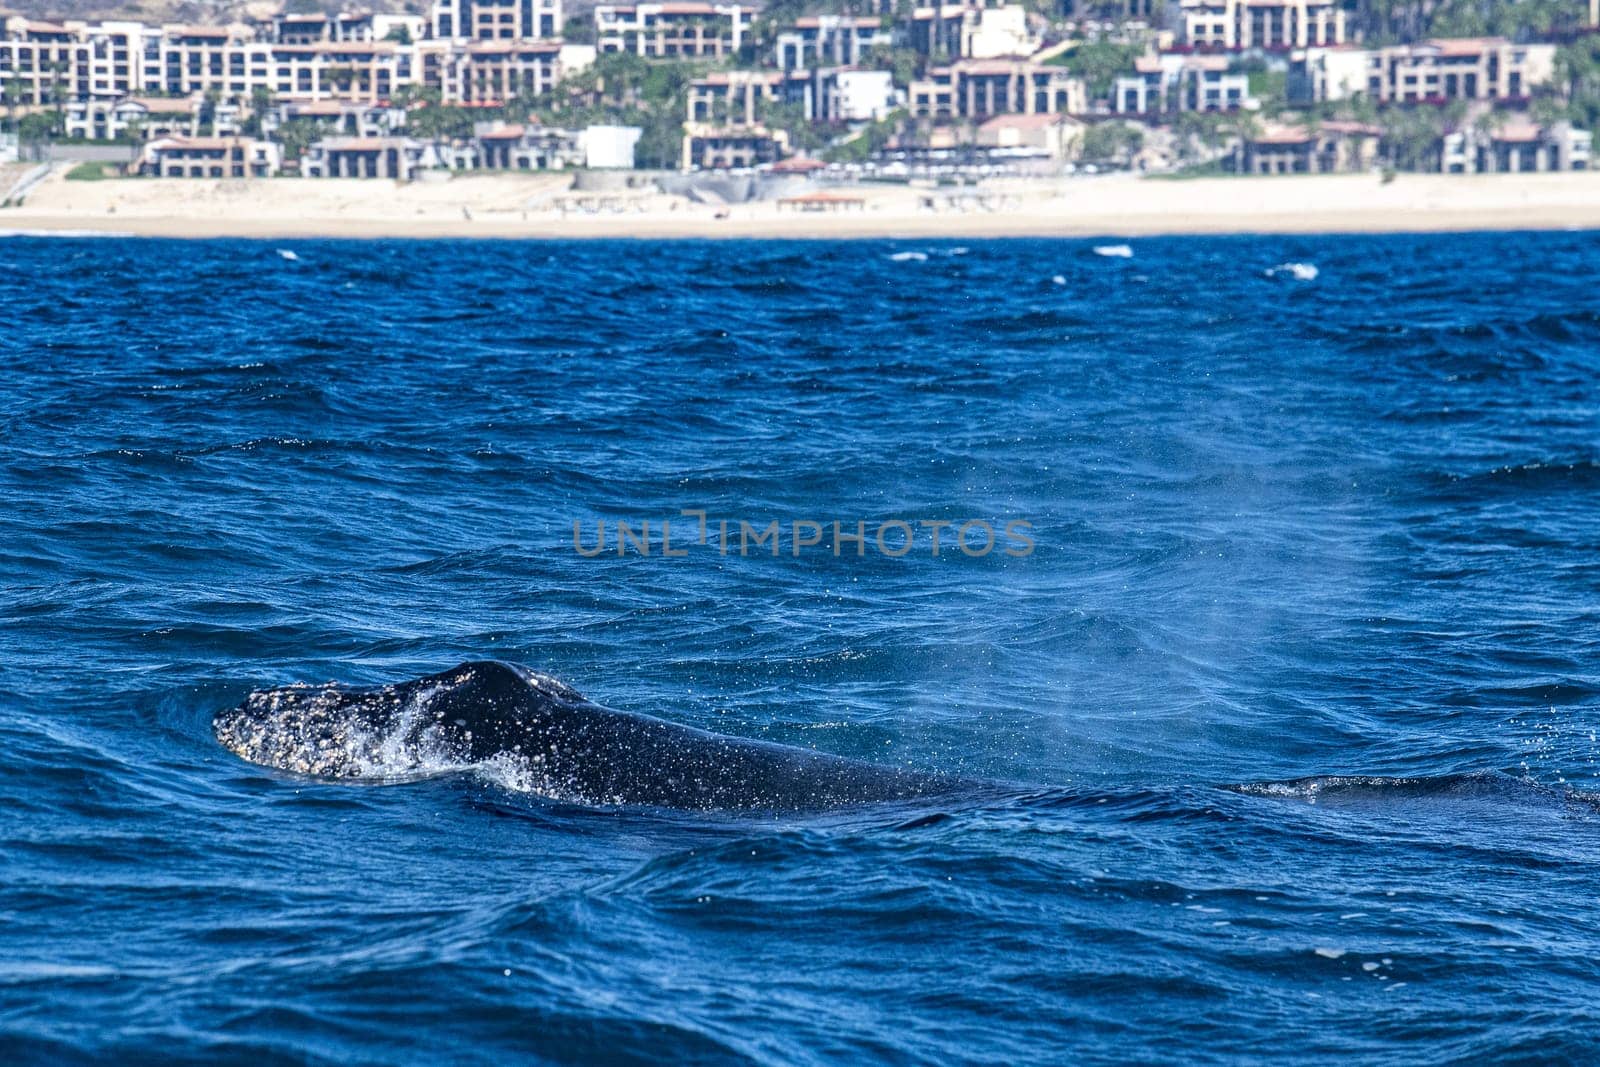 humpback whale in front of whale watching boat in cabo san lucas mexico by AndreaIzzotti